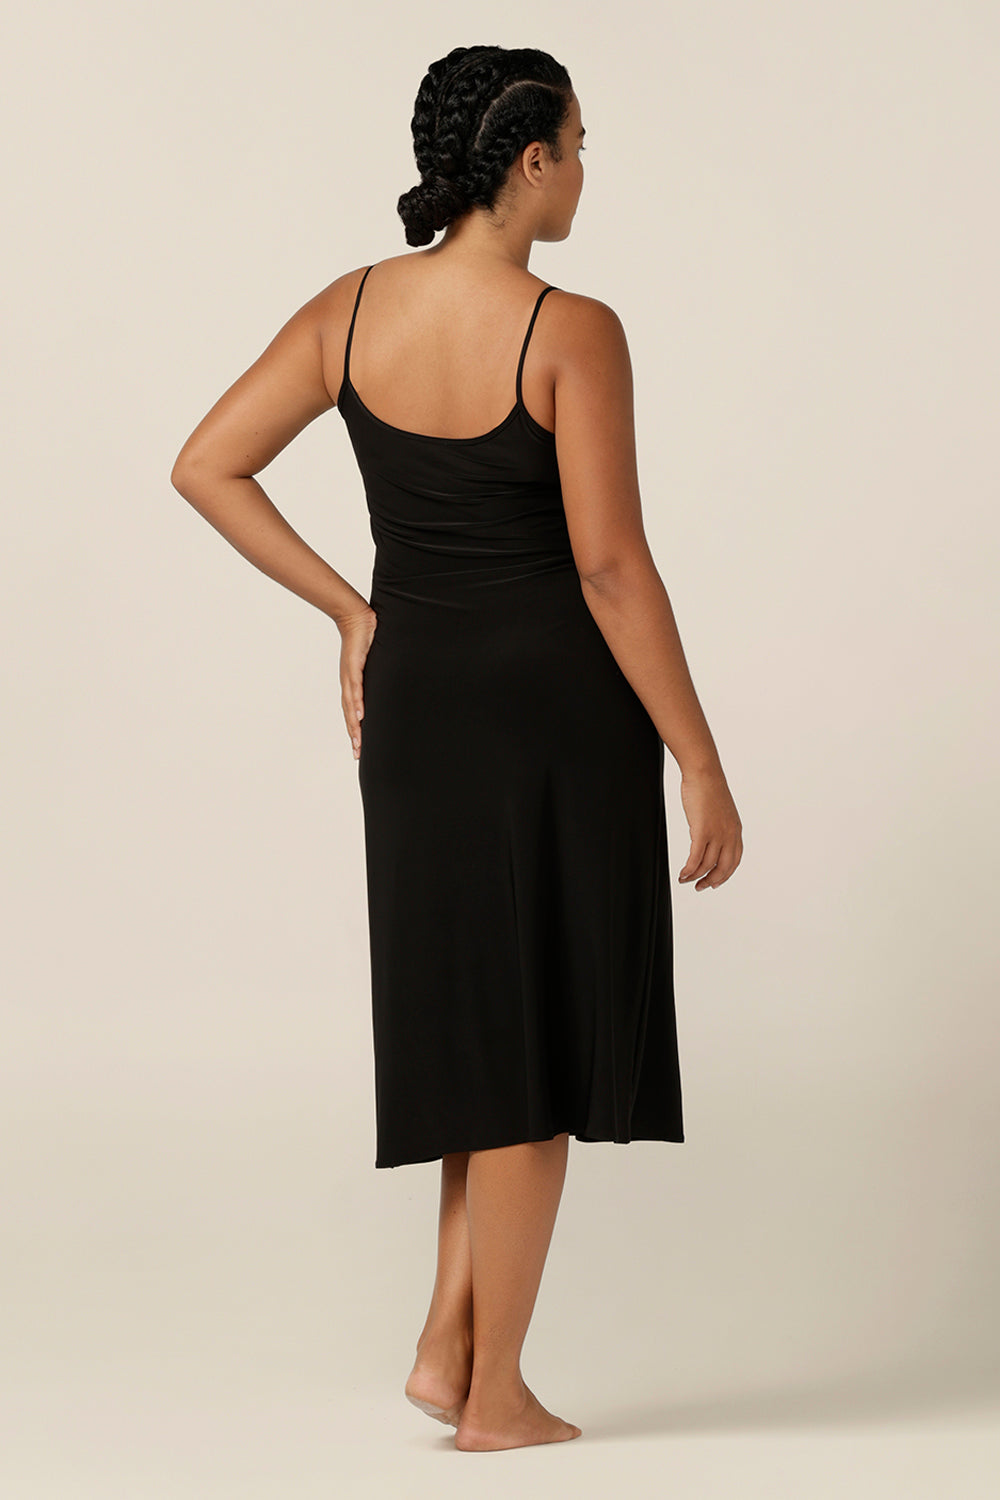 back view of a size 12 woman wearing a below-the-knee length, reversible slip in black, slinky jersey fabric. 